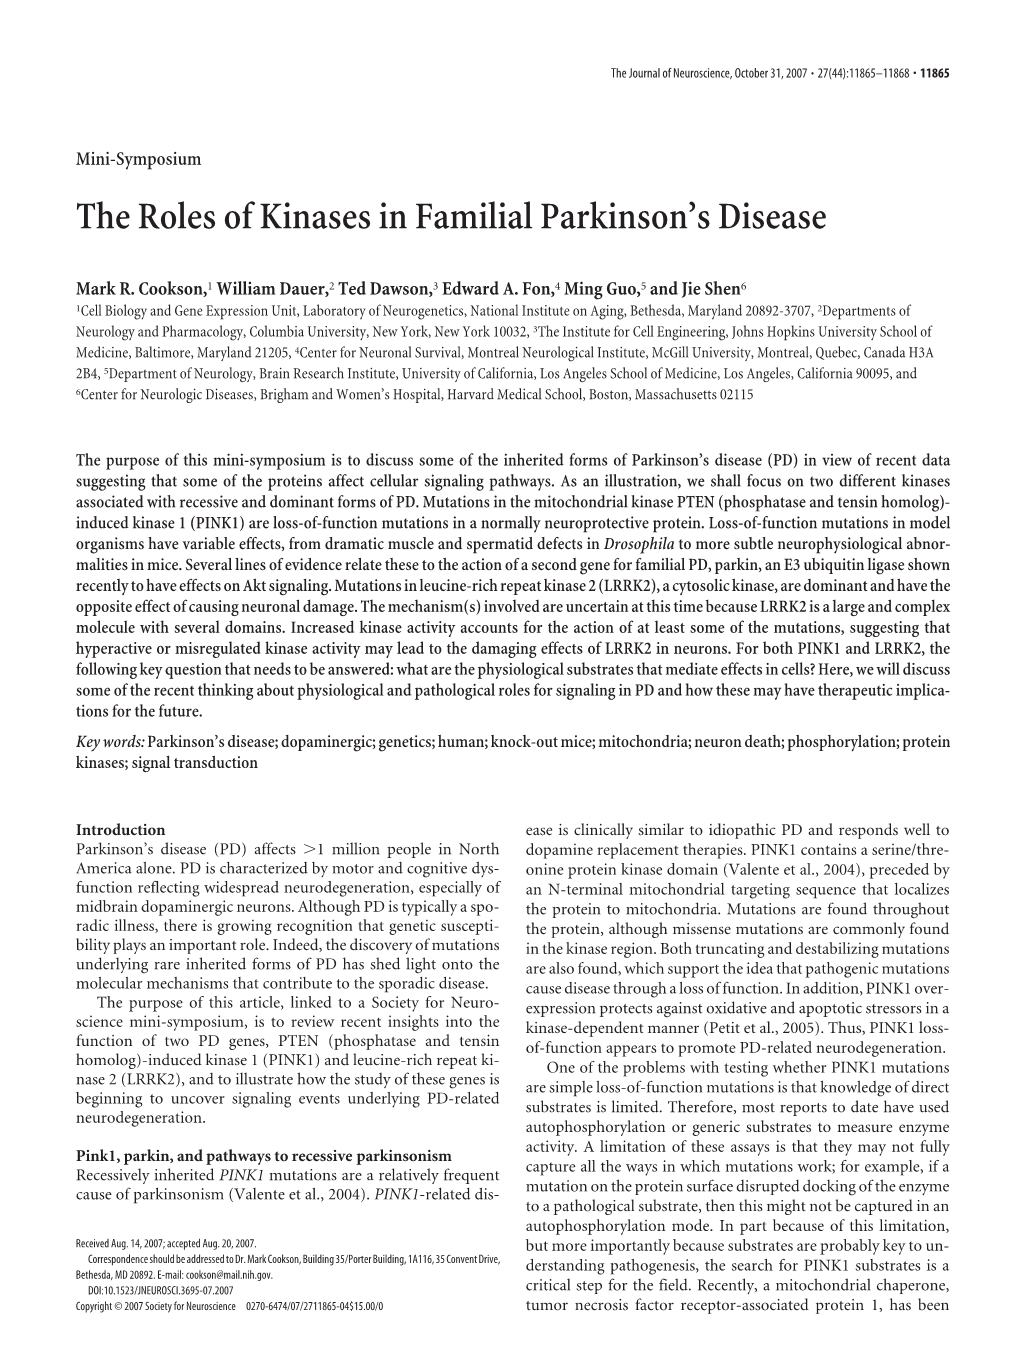 The Roles of Kinases in Familial Parkinson's Disease